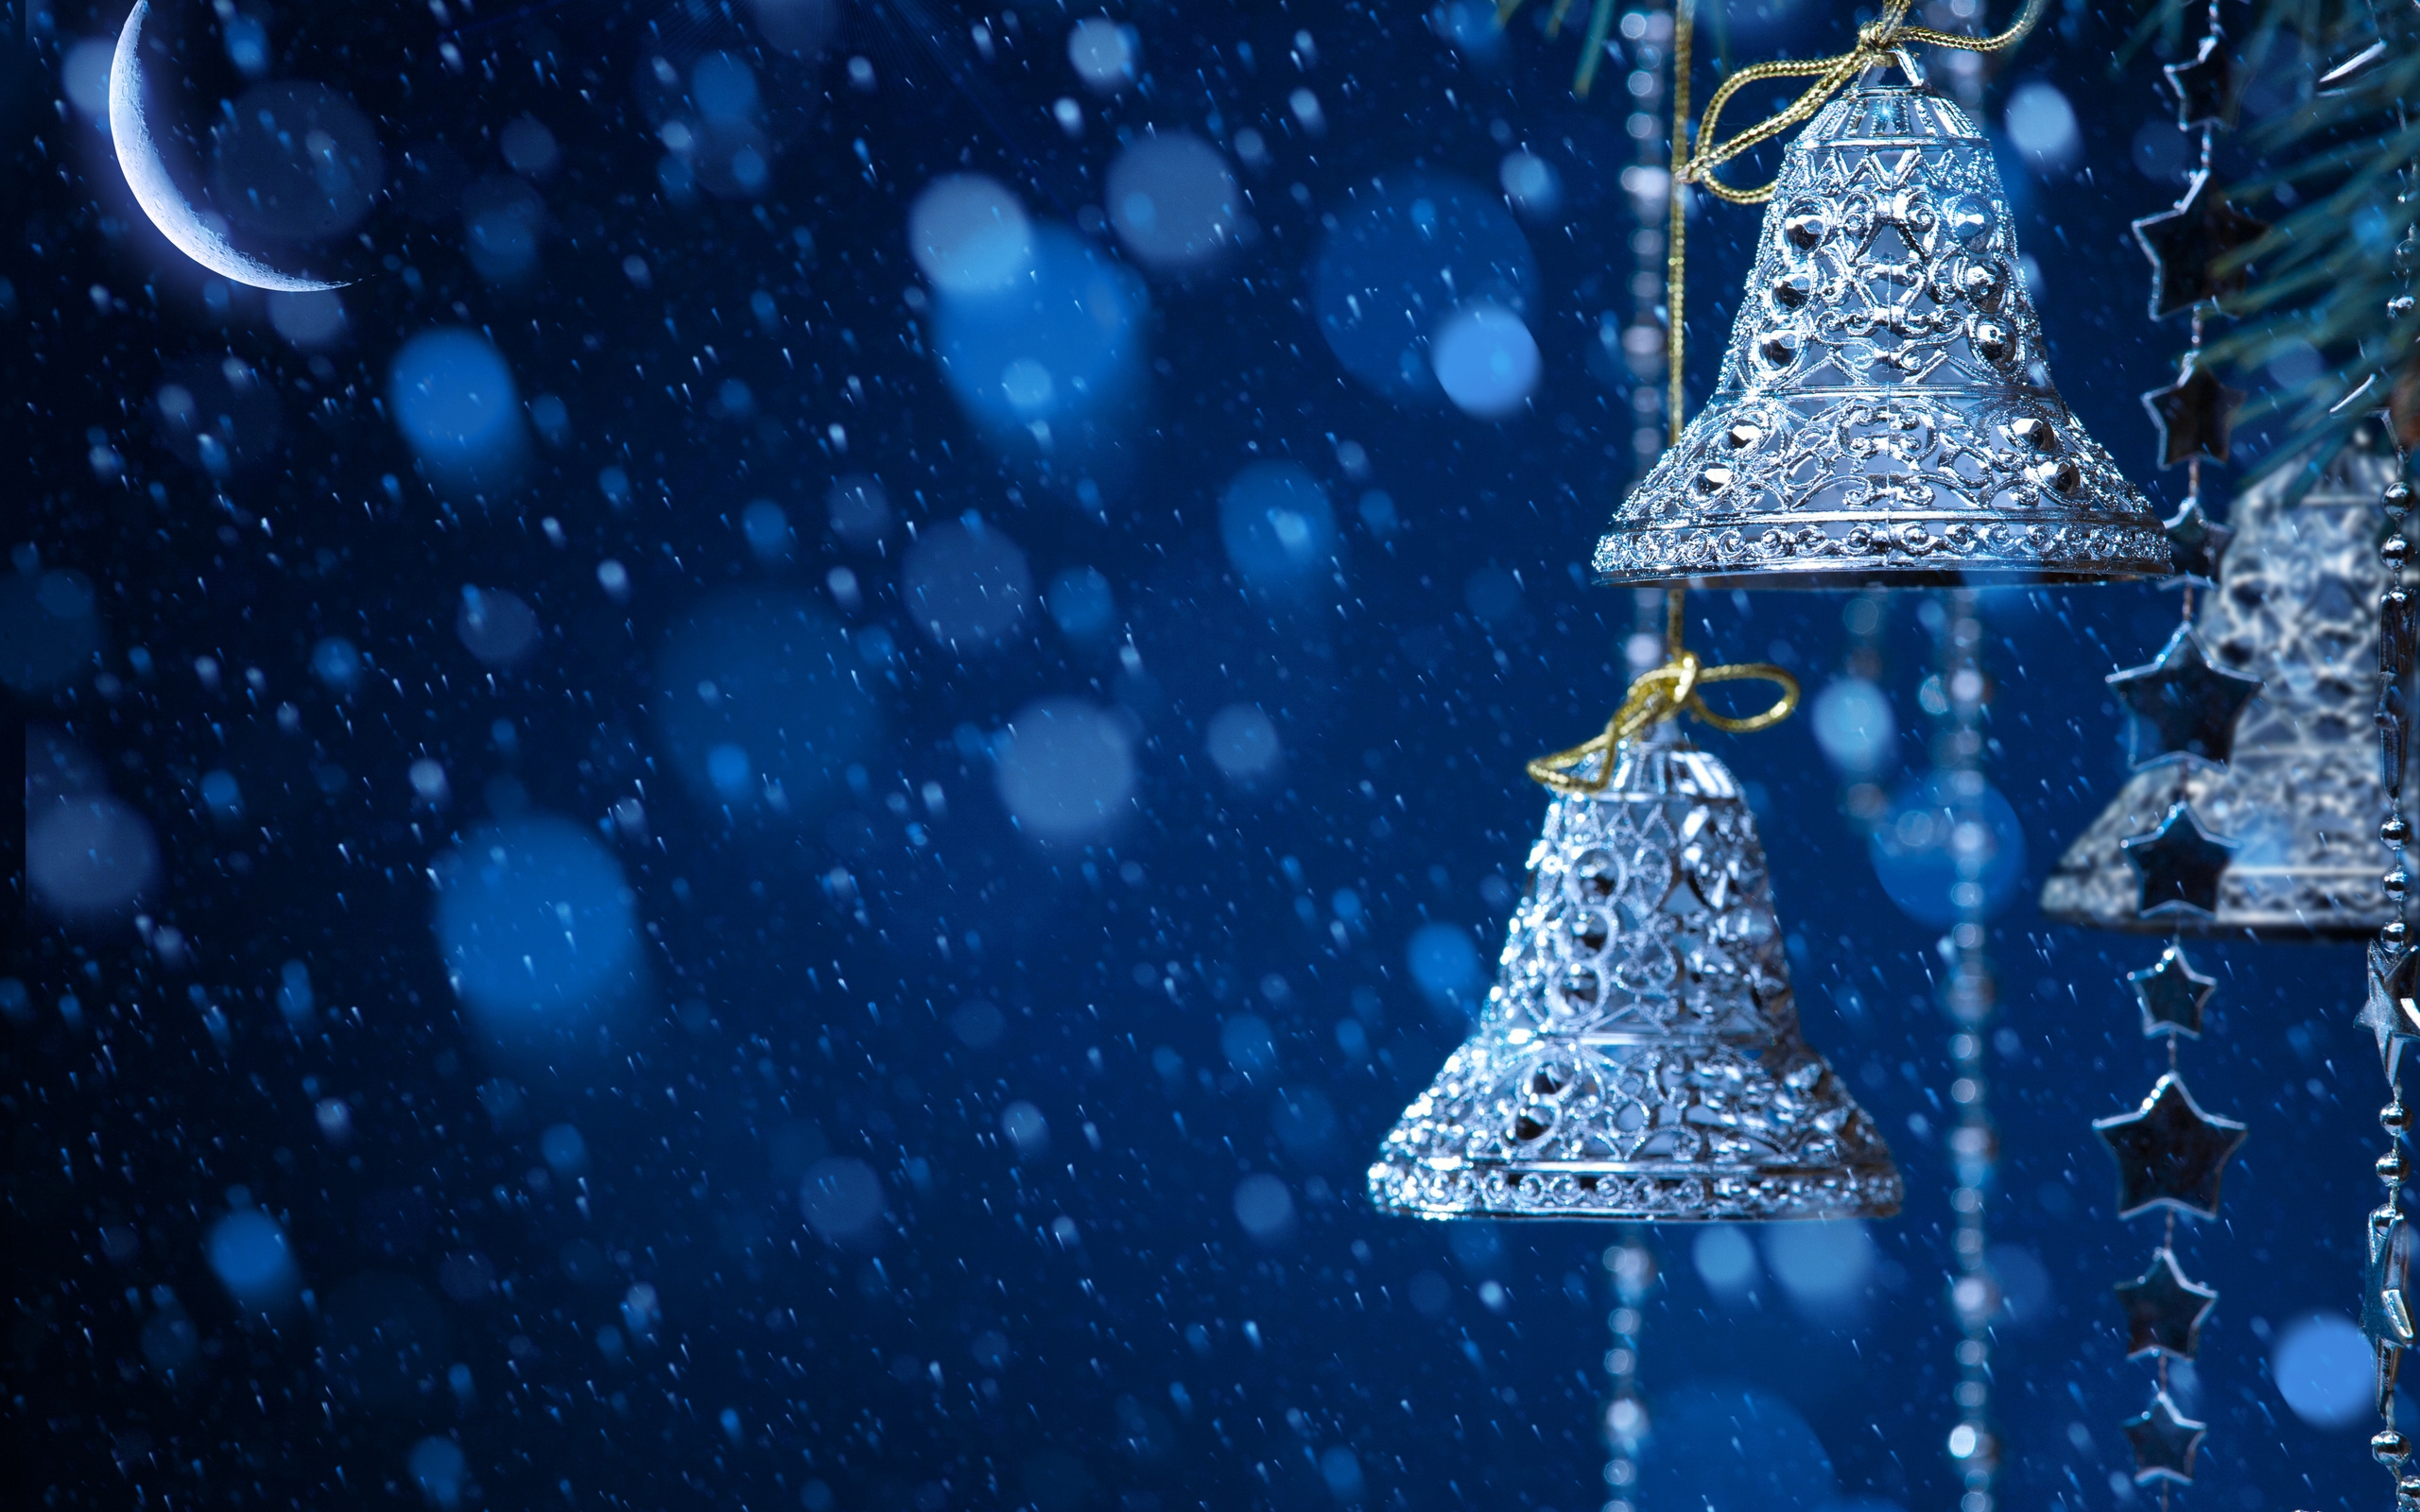 Wallpaper, 2560x1600 px, bell, Christmas, New Year 2560x1600